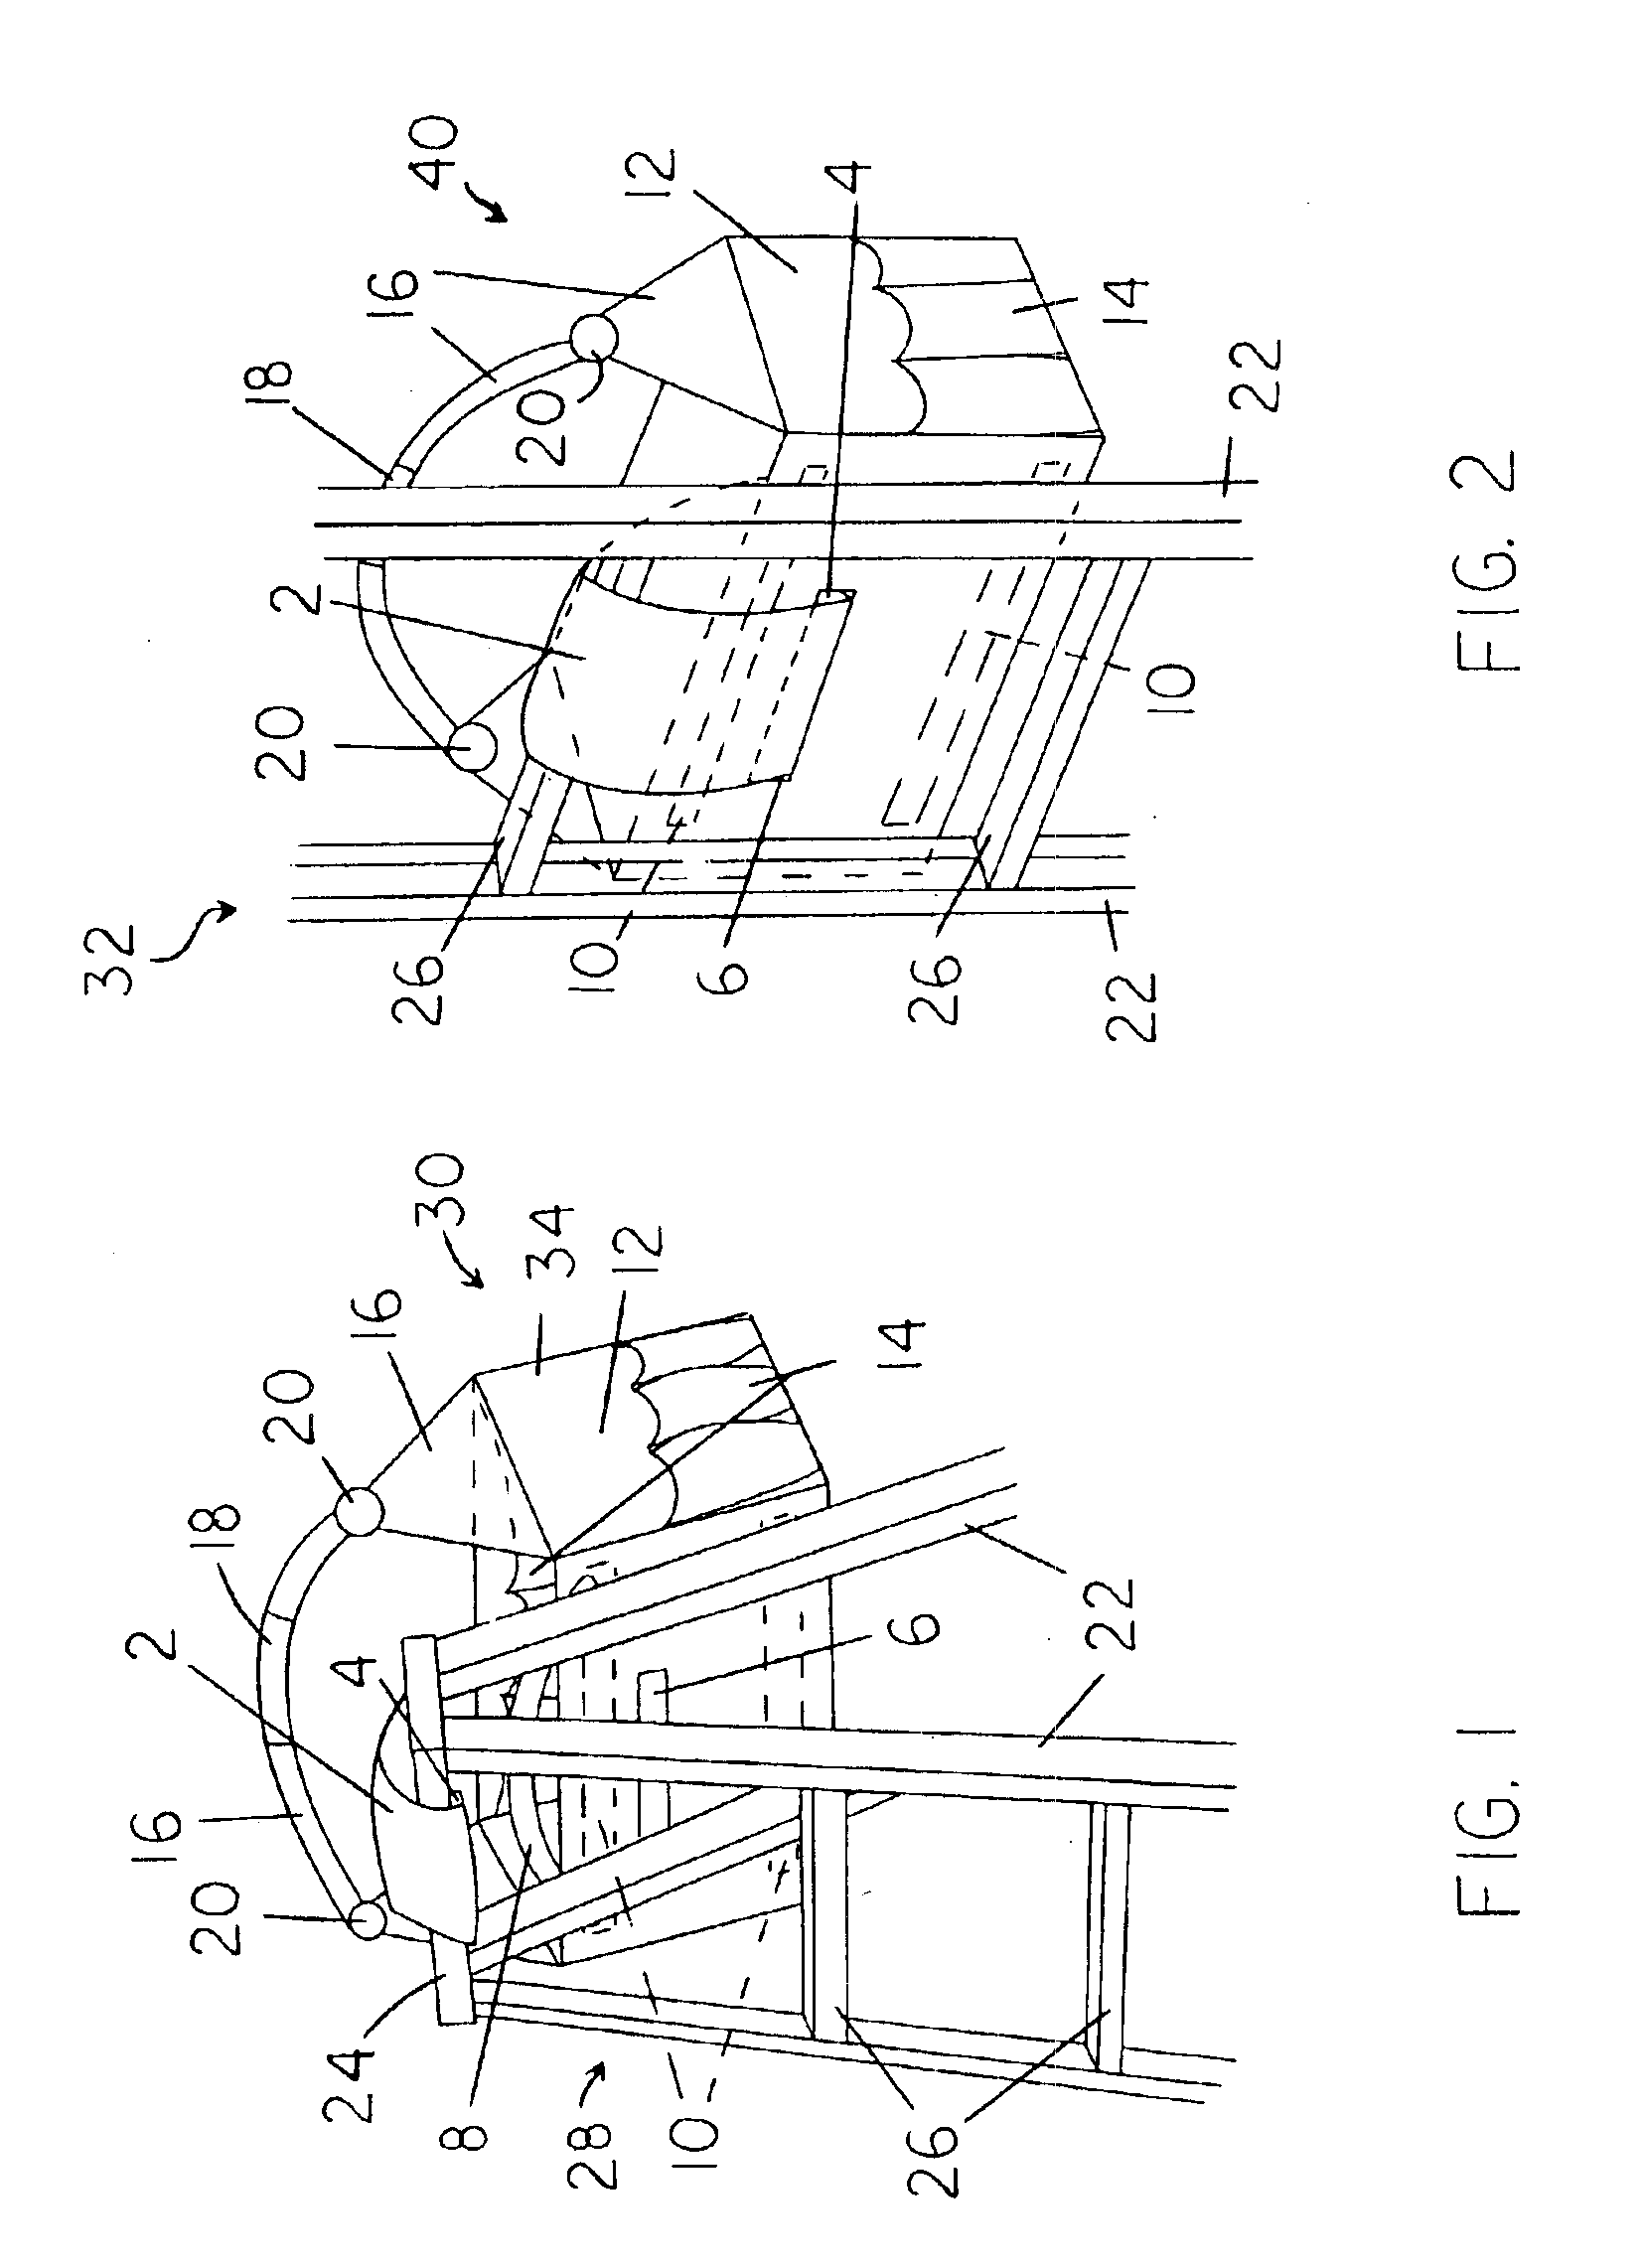 Ladder bag and method of use